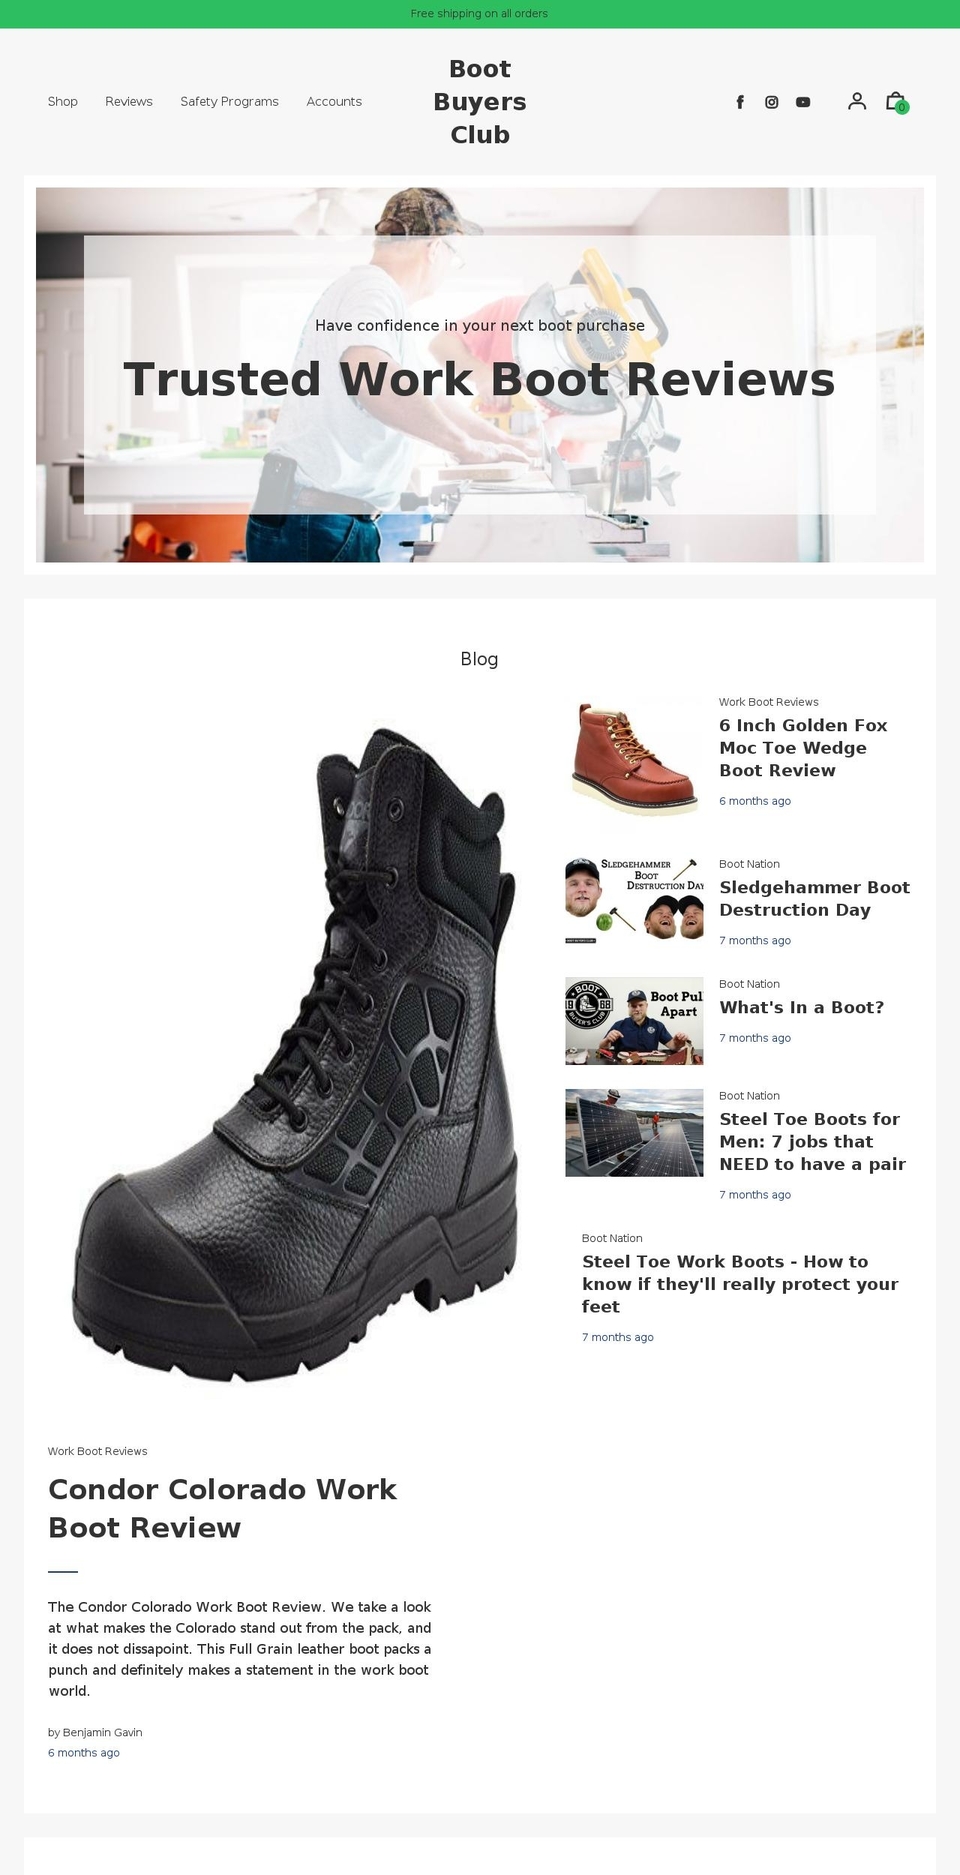 Editorial Shopify theme site example bootbuyersclub.com